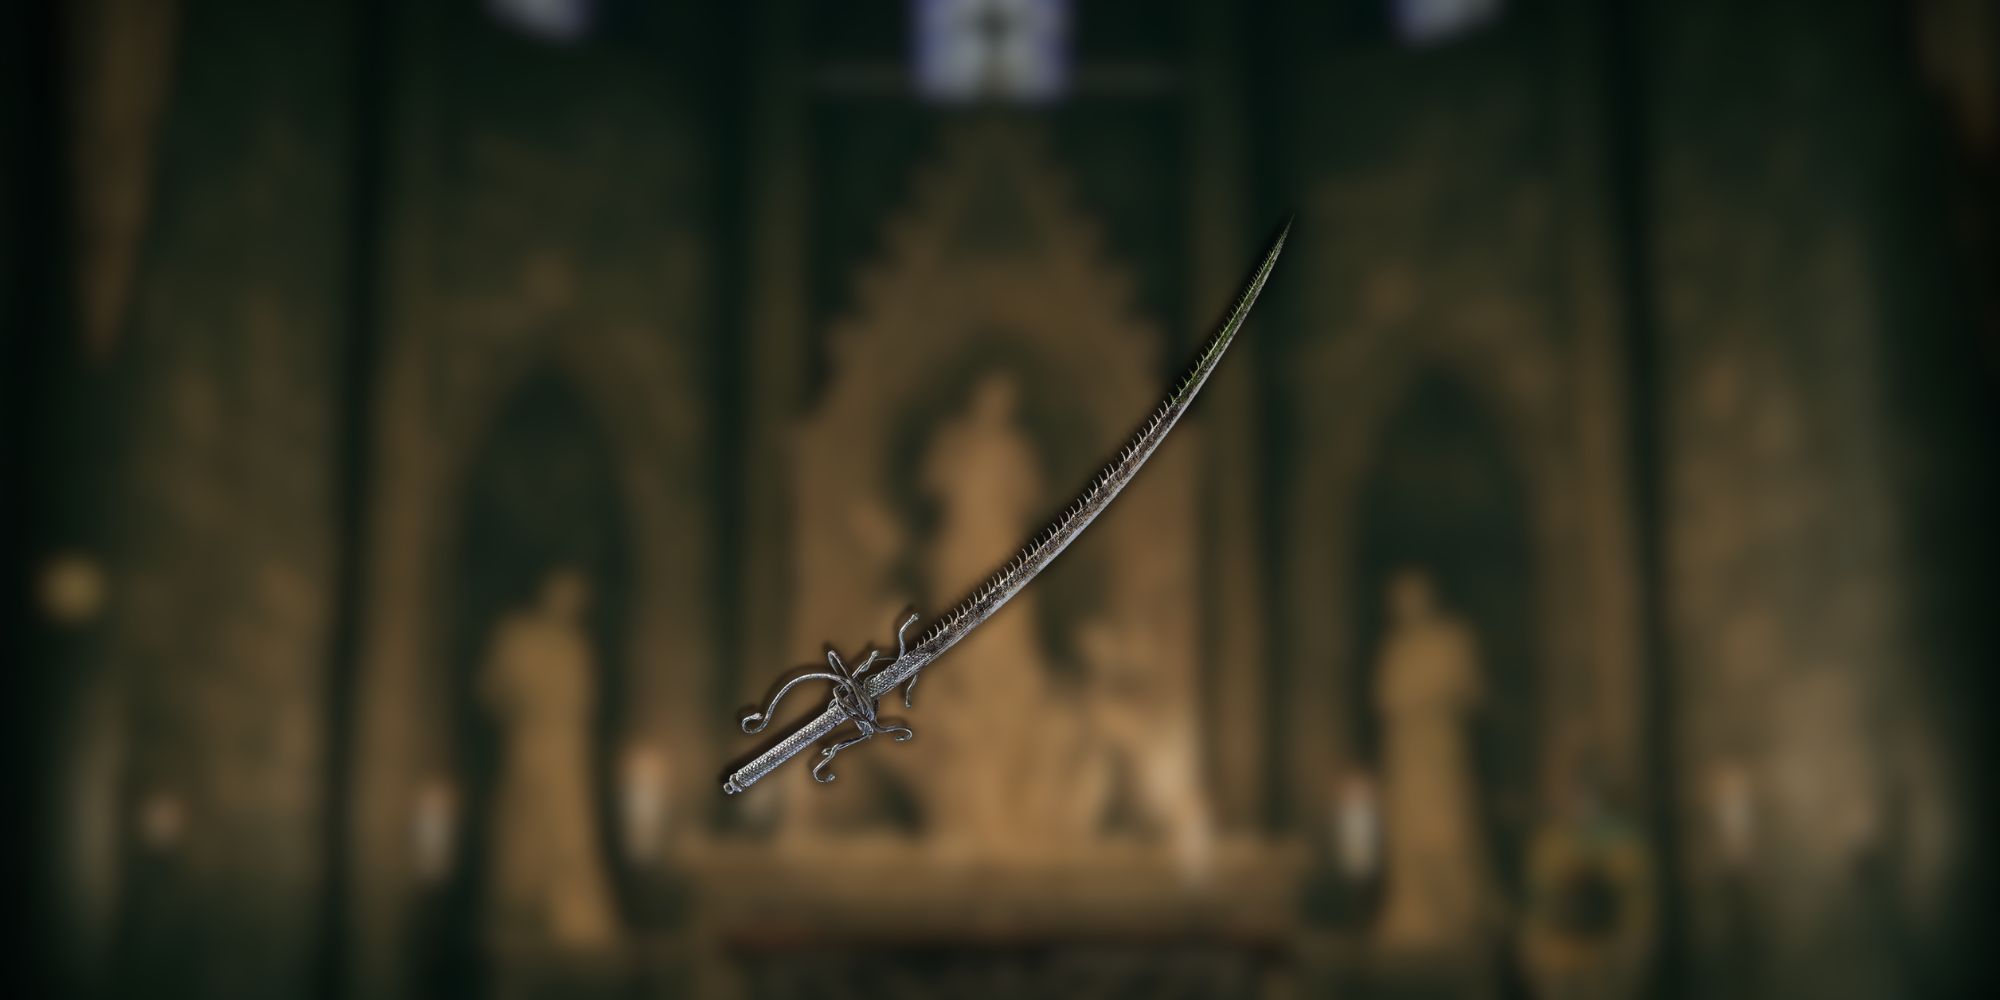 A serrated katana with an ornate handguard overlayed over a blurred background.